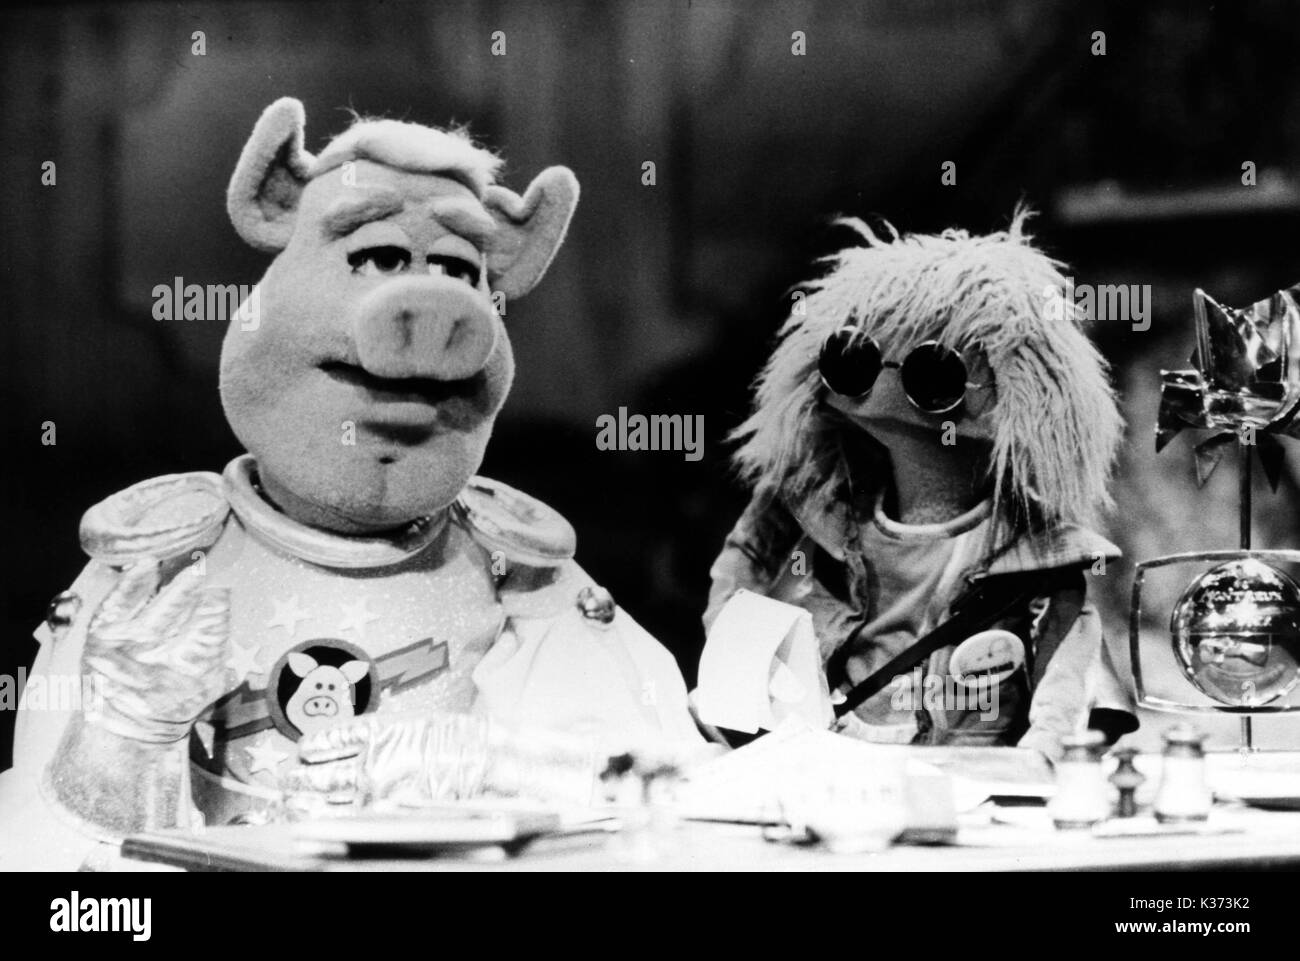 MUPPETS PIGS IN SPACE Pic Stock Photo